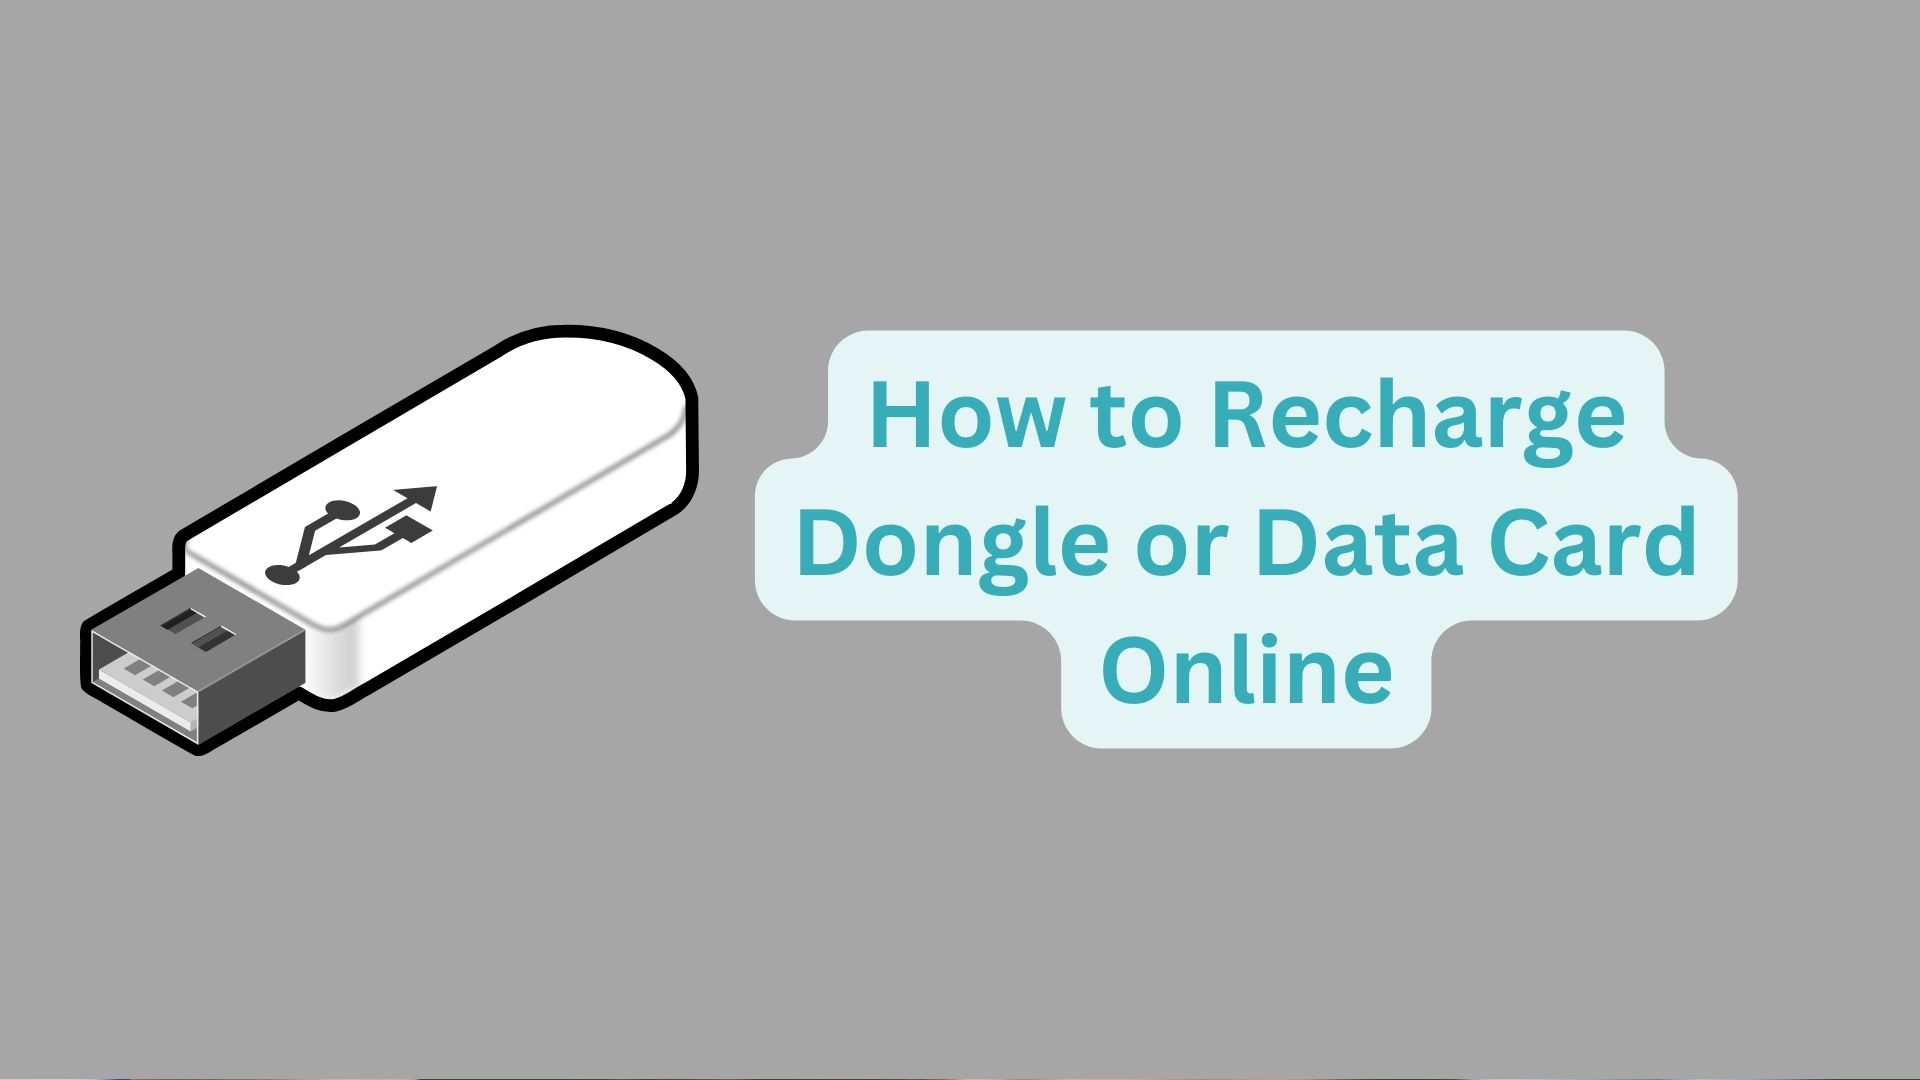 How to Recharge Dongle or Data Card Online